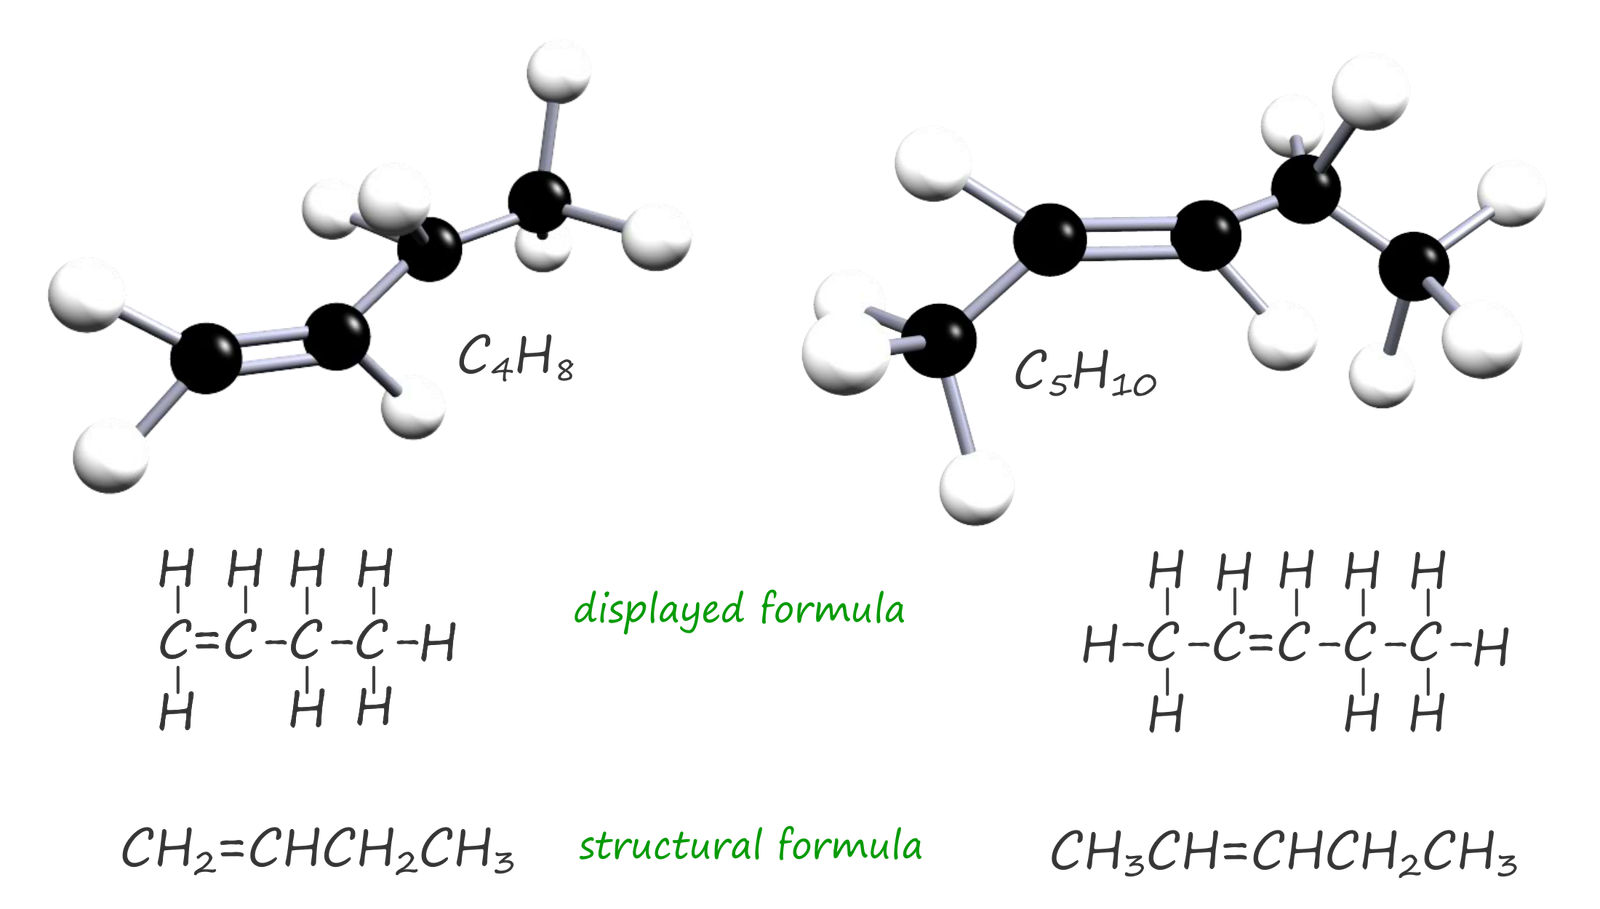 Ball and stick model of butene and penetene, as well as the structural formulae and displayed formula of butene and penetene are shown